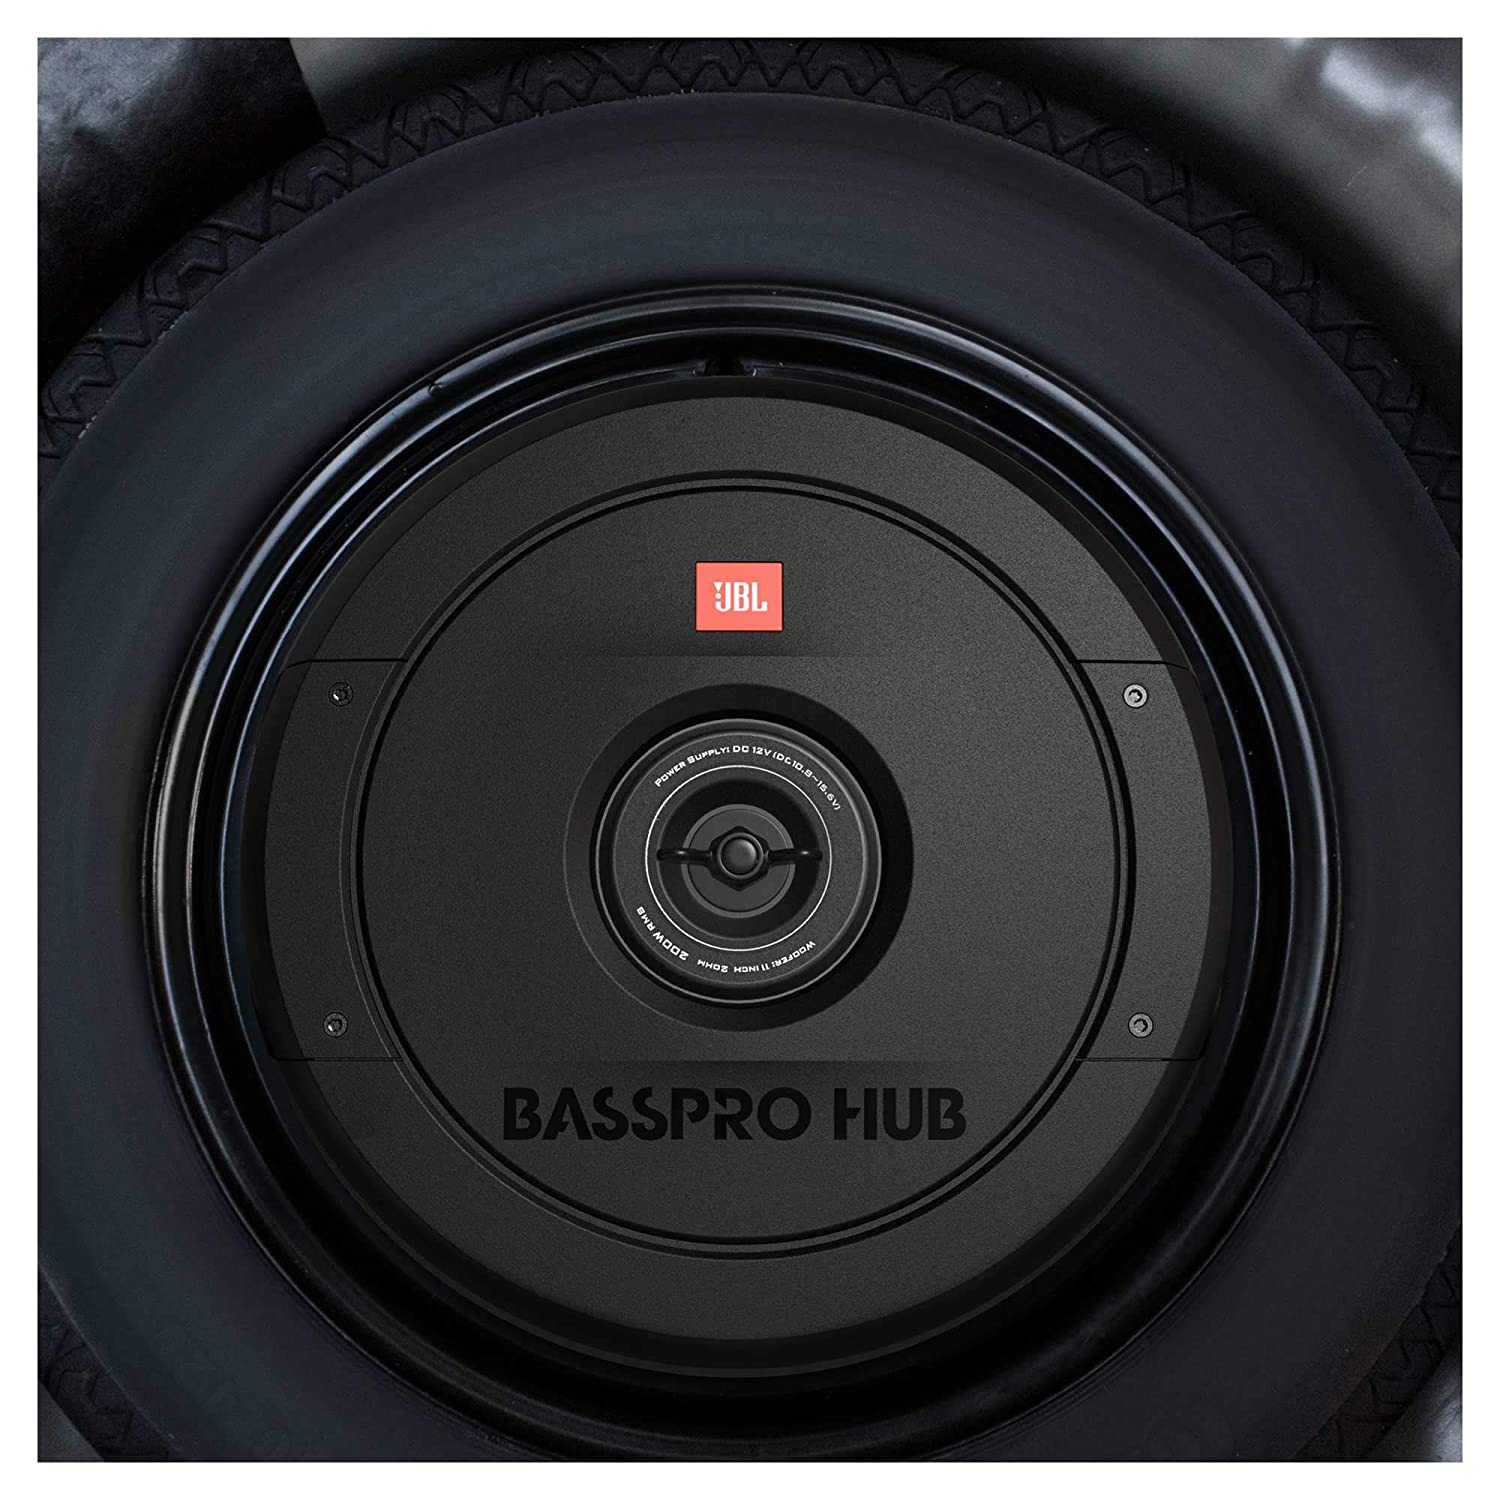 JBL BASSPro Hub 11 Spare tire subwoofer with built-in 200W RMS amplifier with remote control